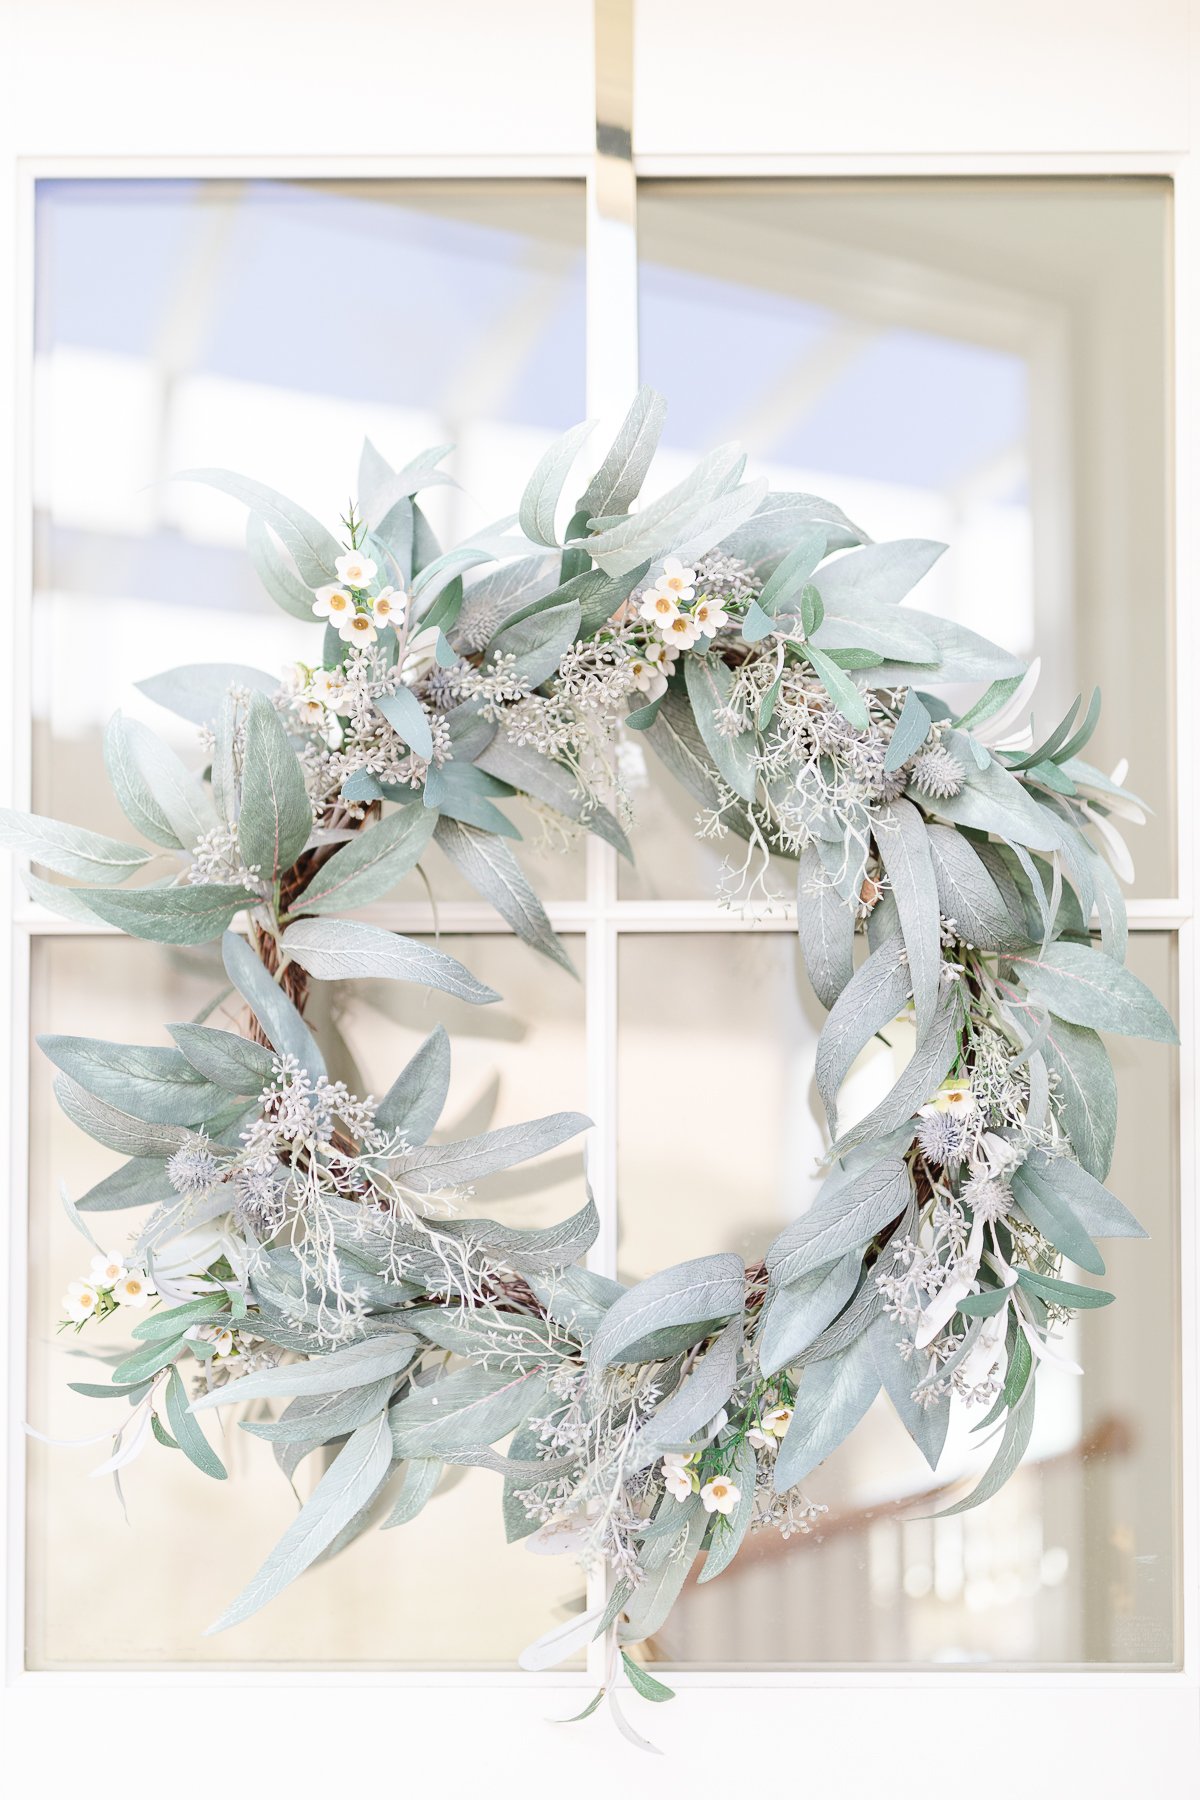 A eucalyptus wreath hangs on a window, perfect for spring.